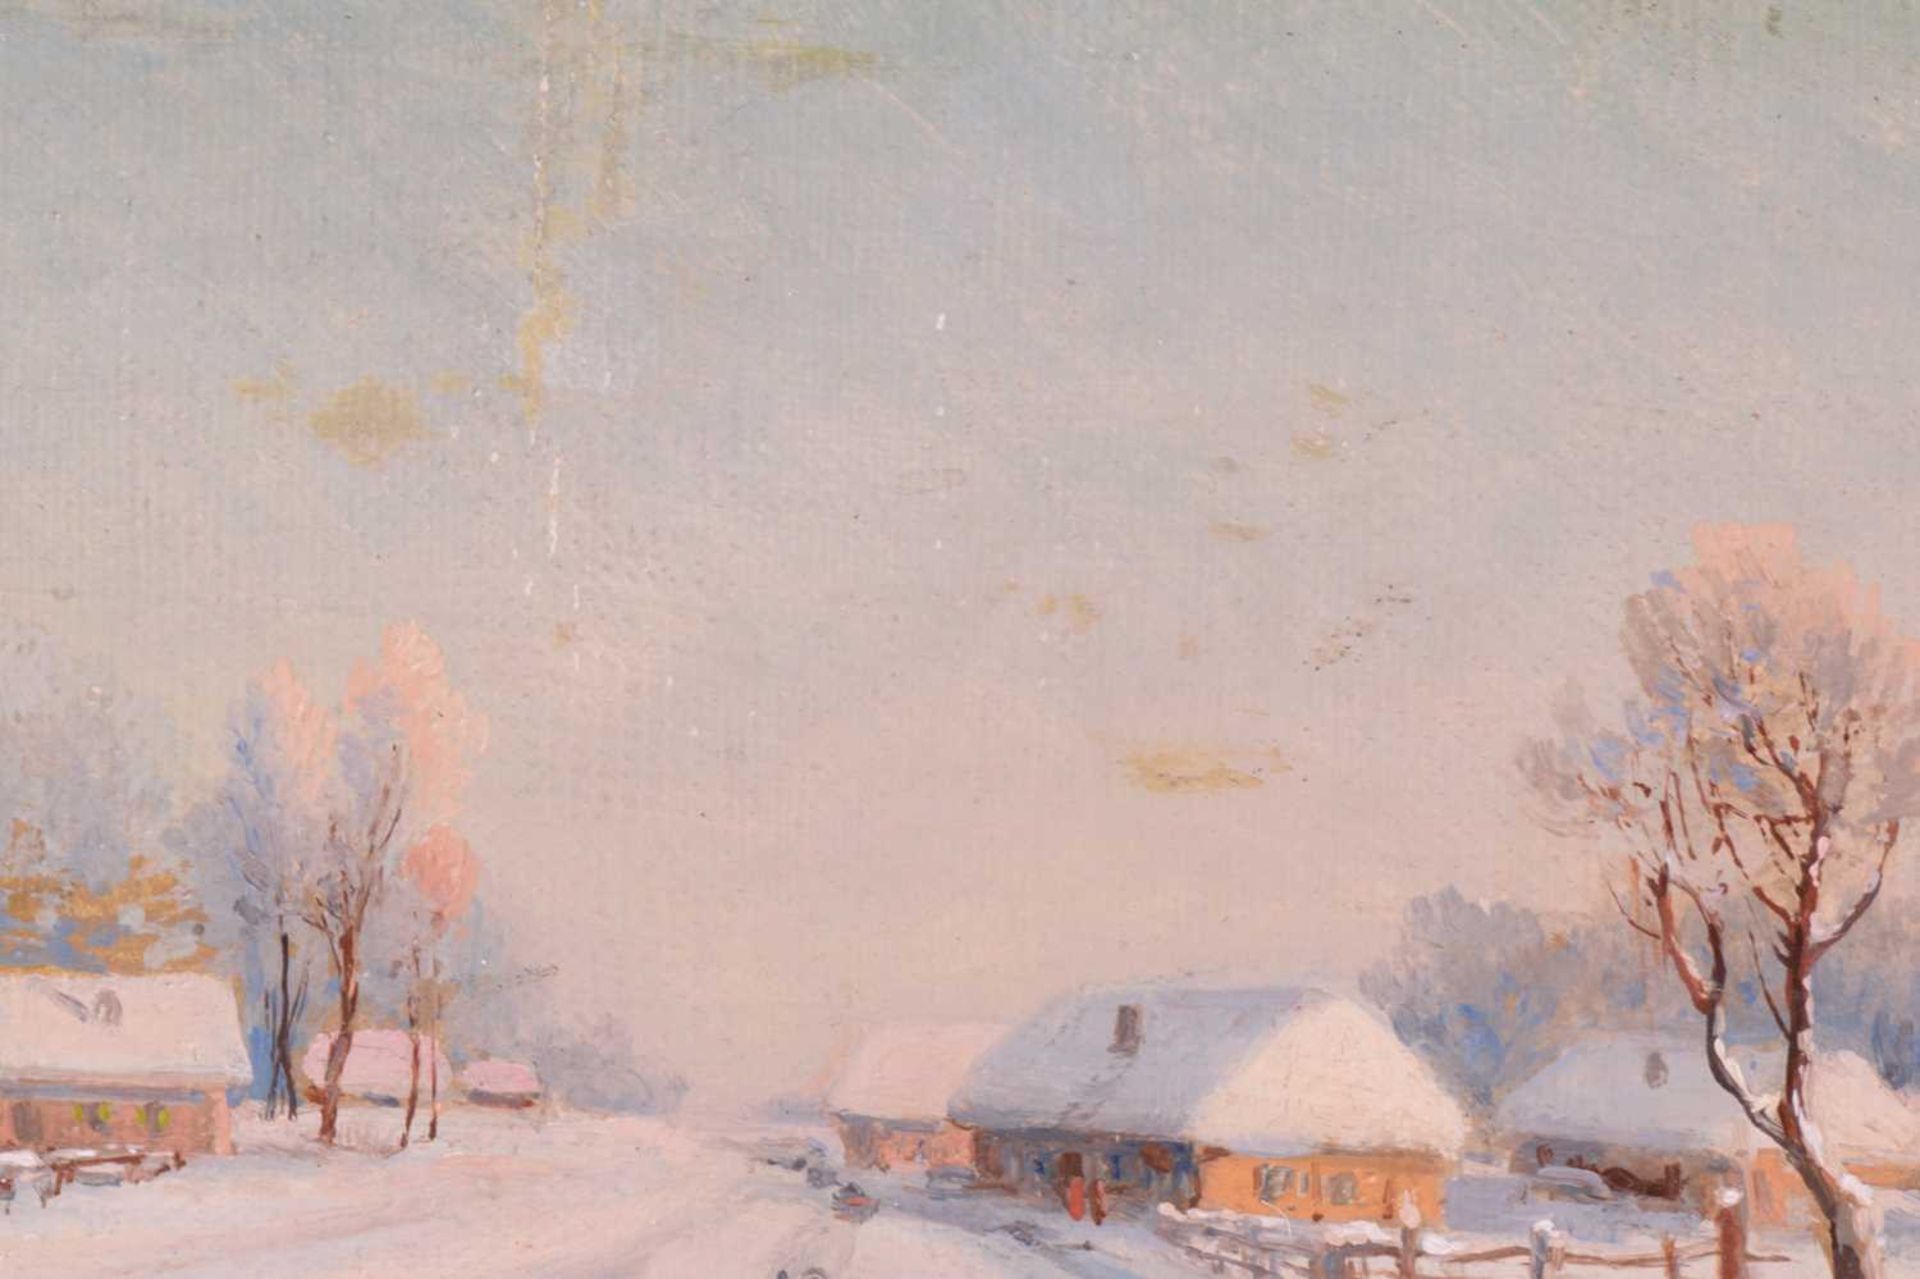 Fedor Vassilievich Belousov (1885 - 1939), A Winter Village Scene, signed and dated 1906, oil on - Image 12 of 12